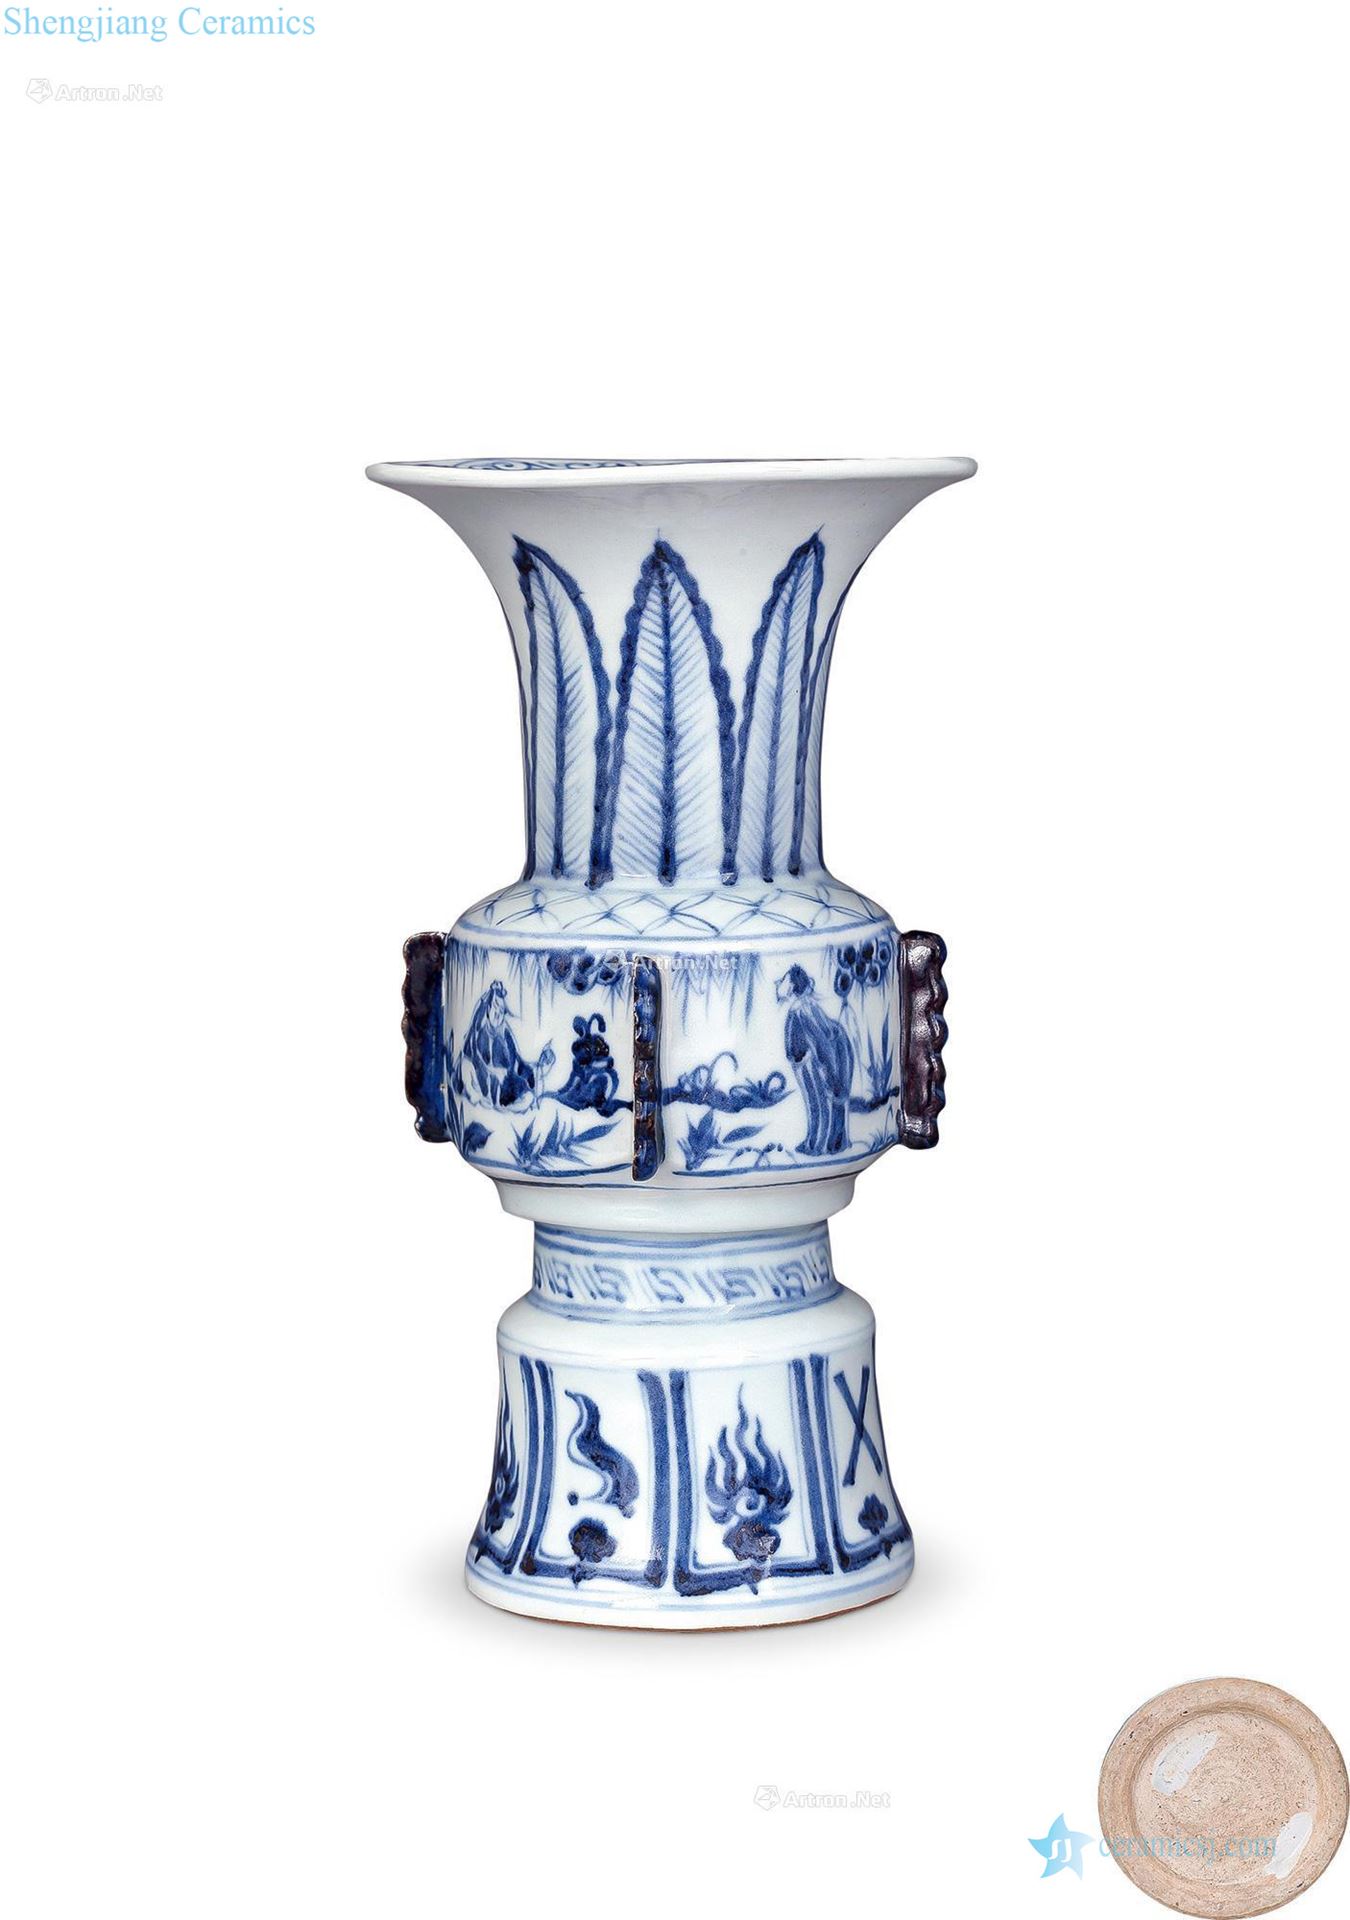 yuan The ji flower vase with blue and white characters